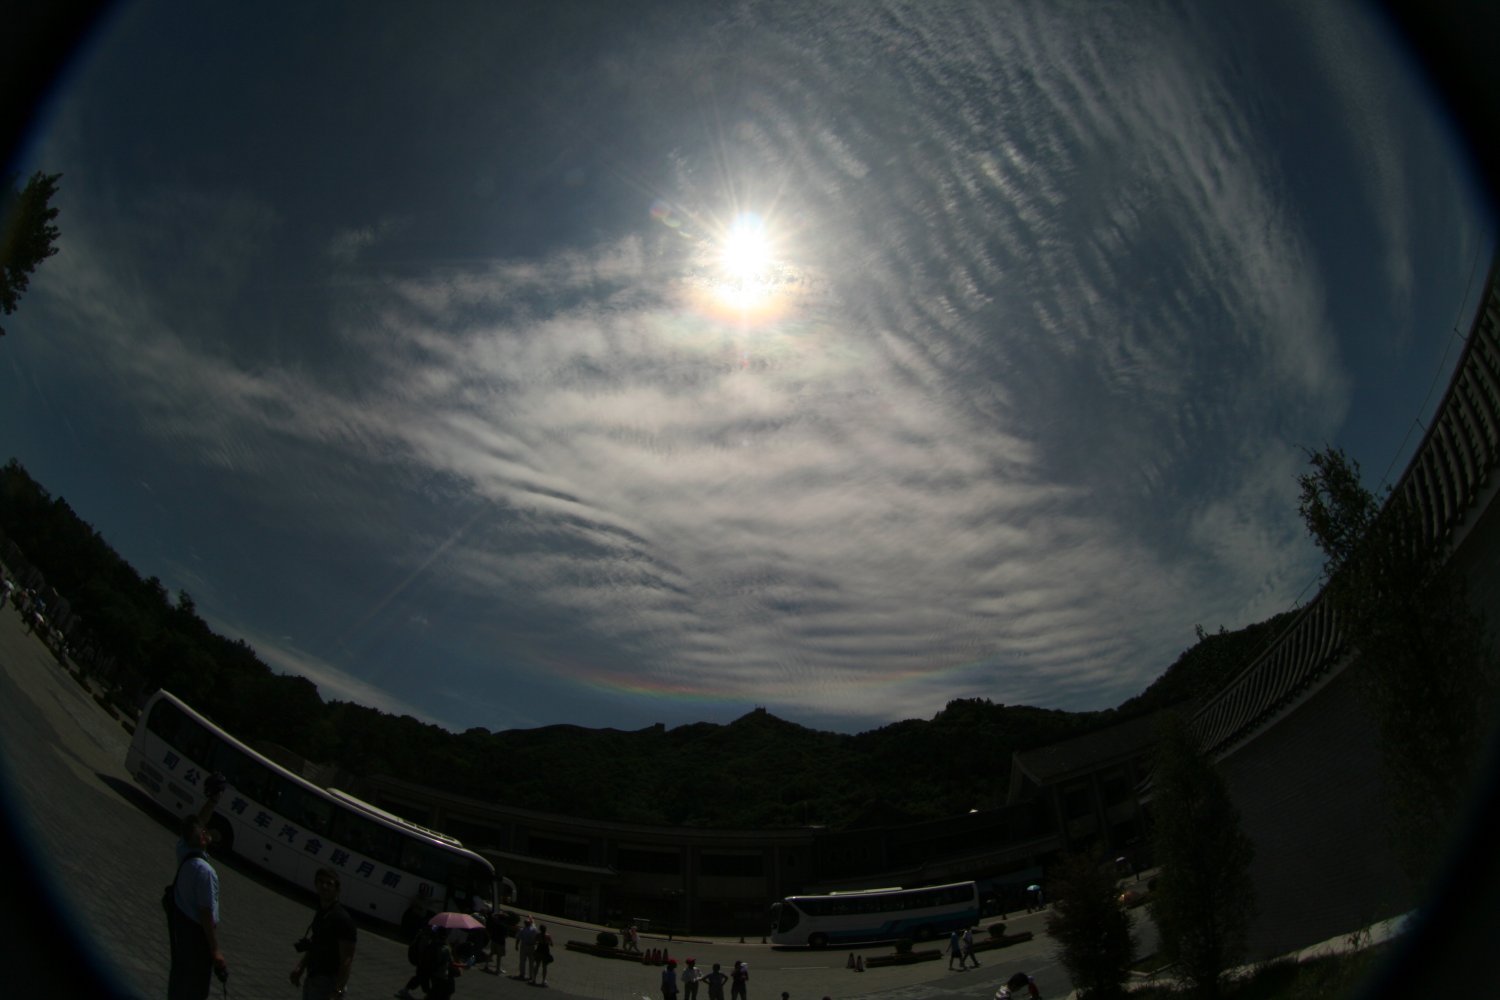 Circumhorizon arc with nacreous clouds over Chinese Great Wall: 126 KB; click on the image to enlarge to 1000x1500 pixel